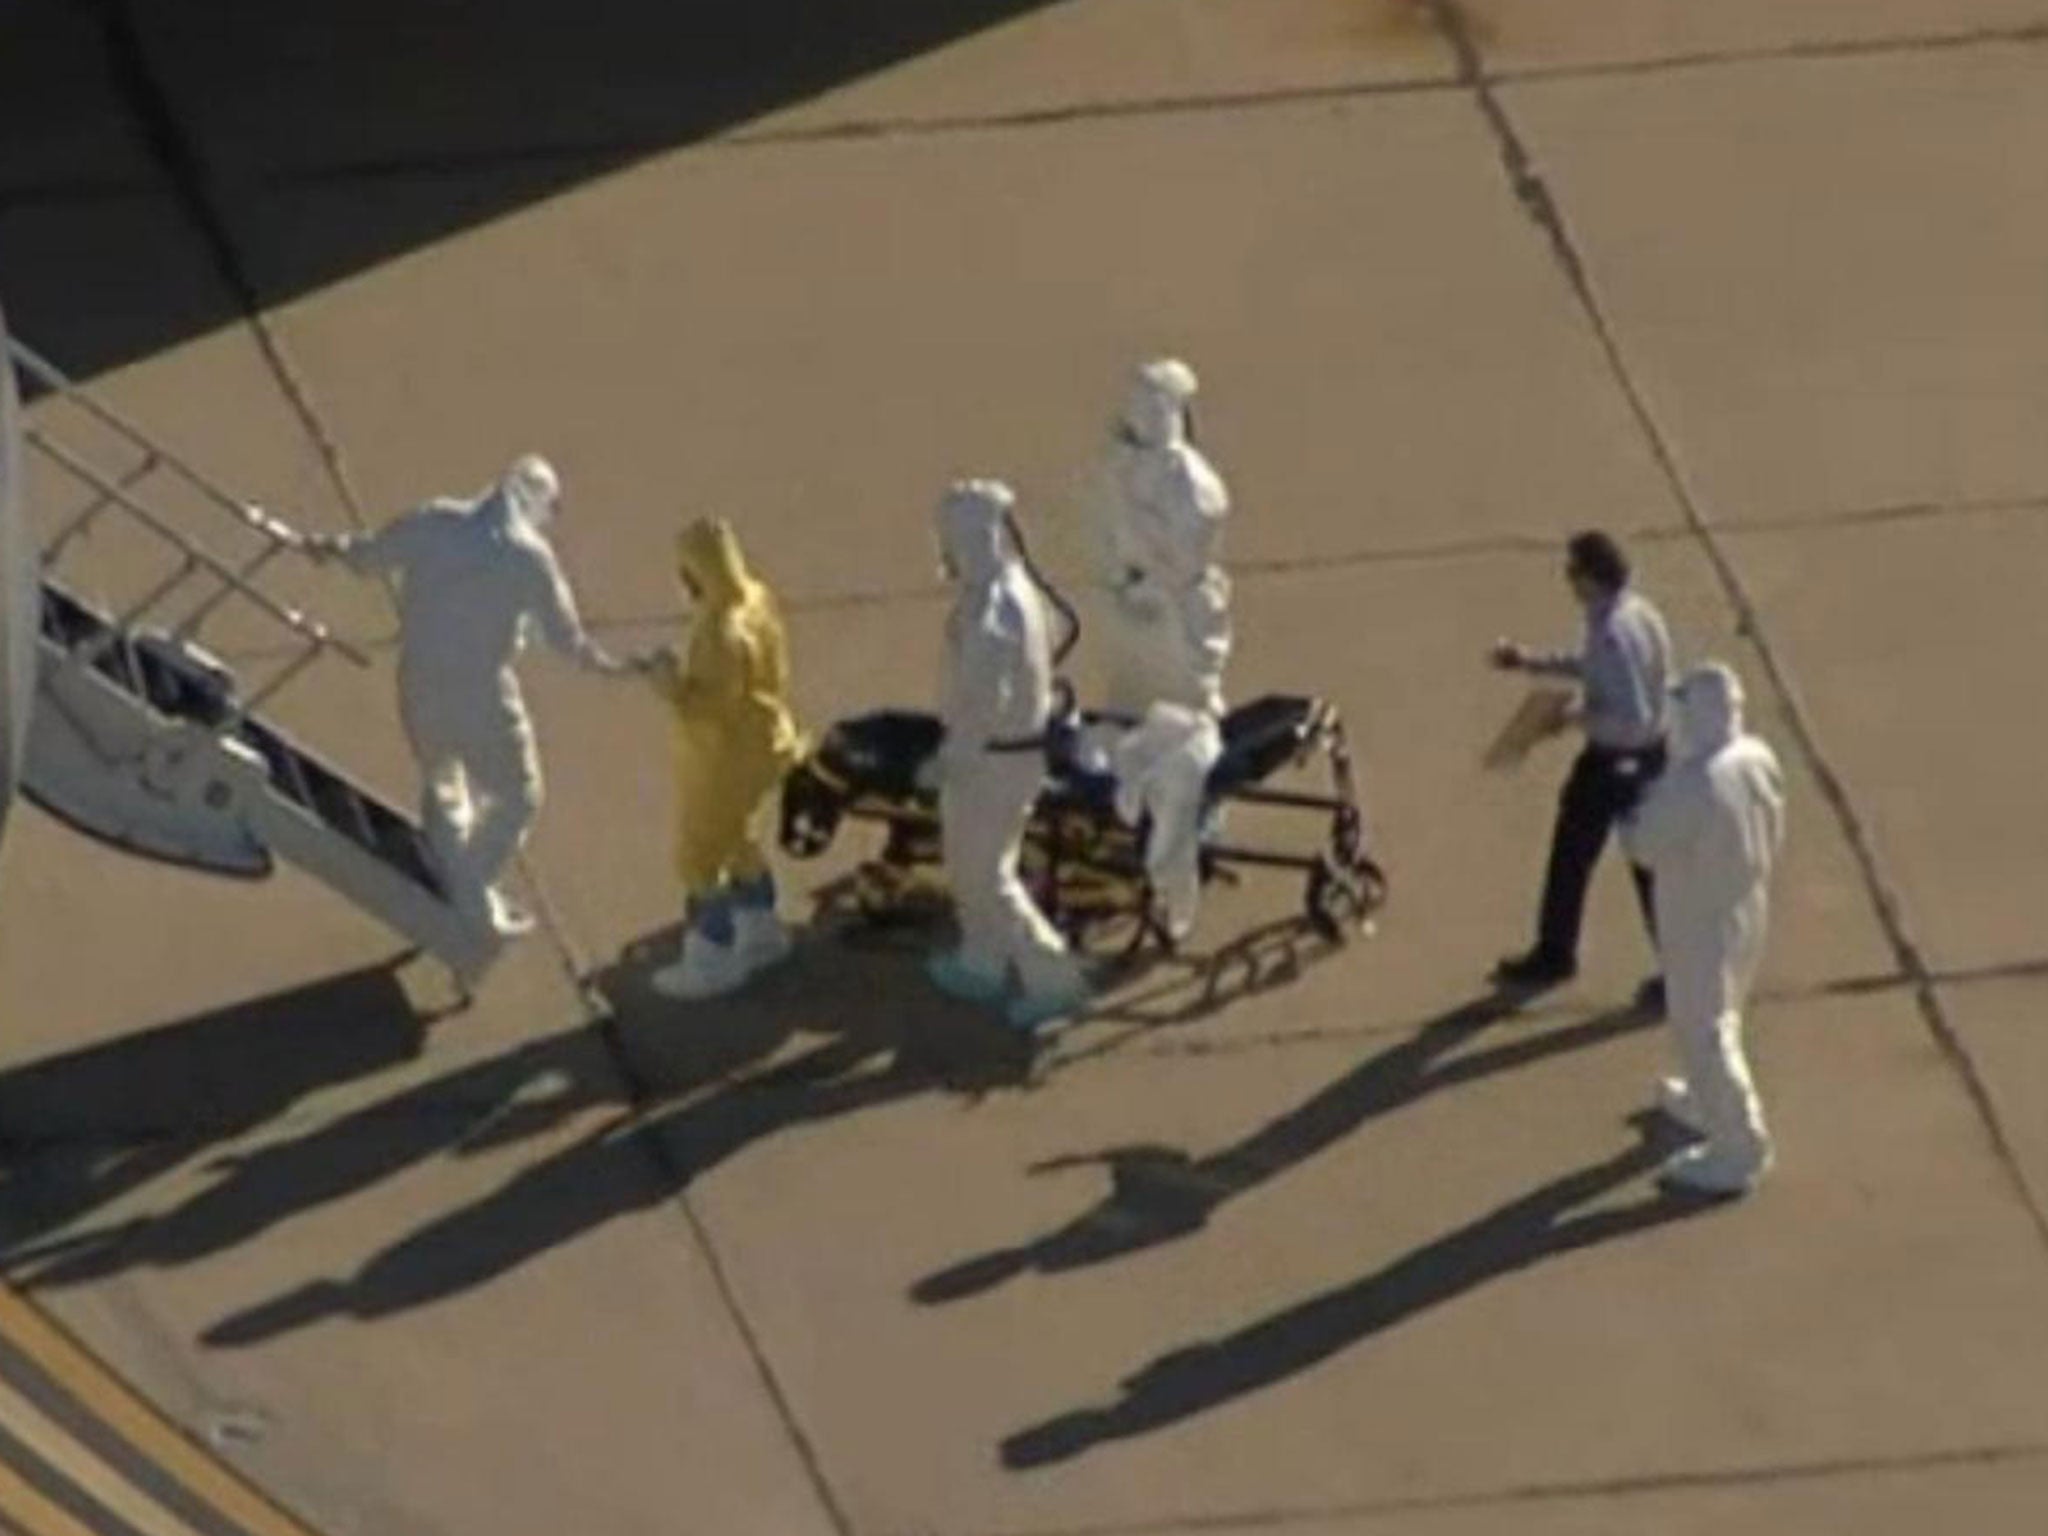 Video footage has emerged of a plain-clothed man surrounded by people in full hazmat suits transporting the second US Ebola patient to Atlanta